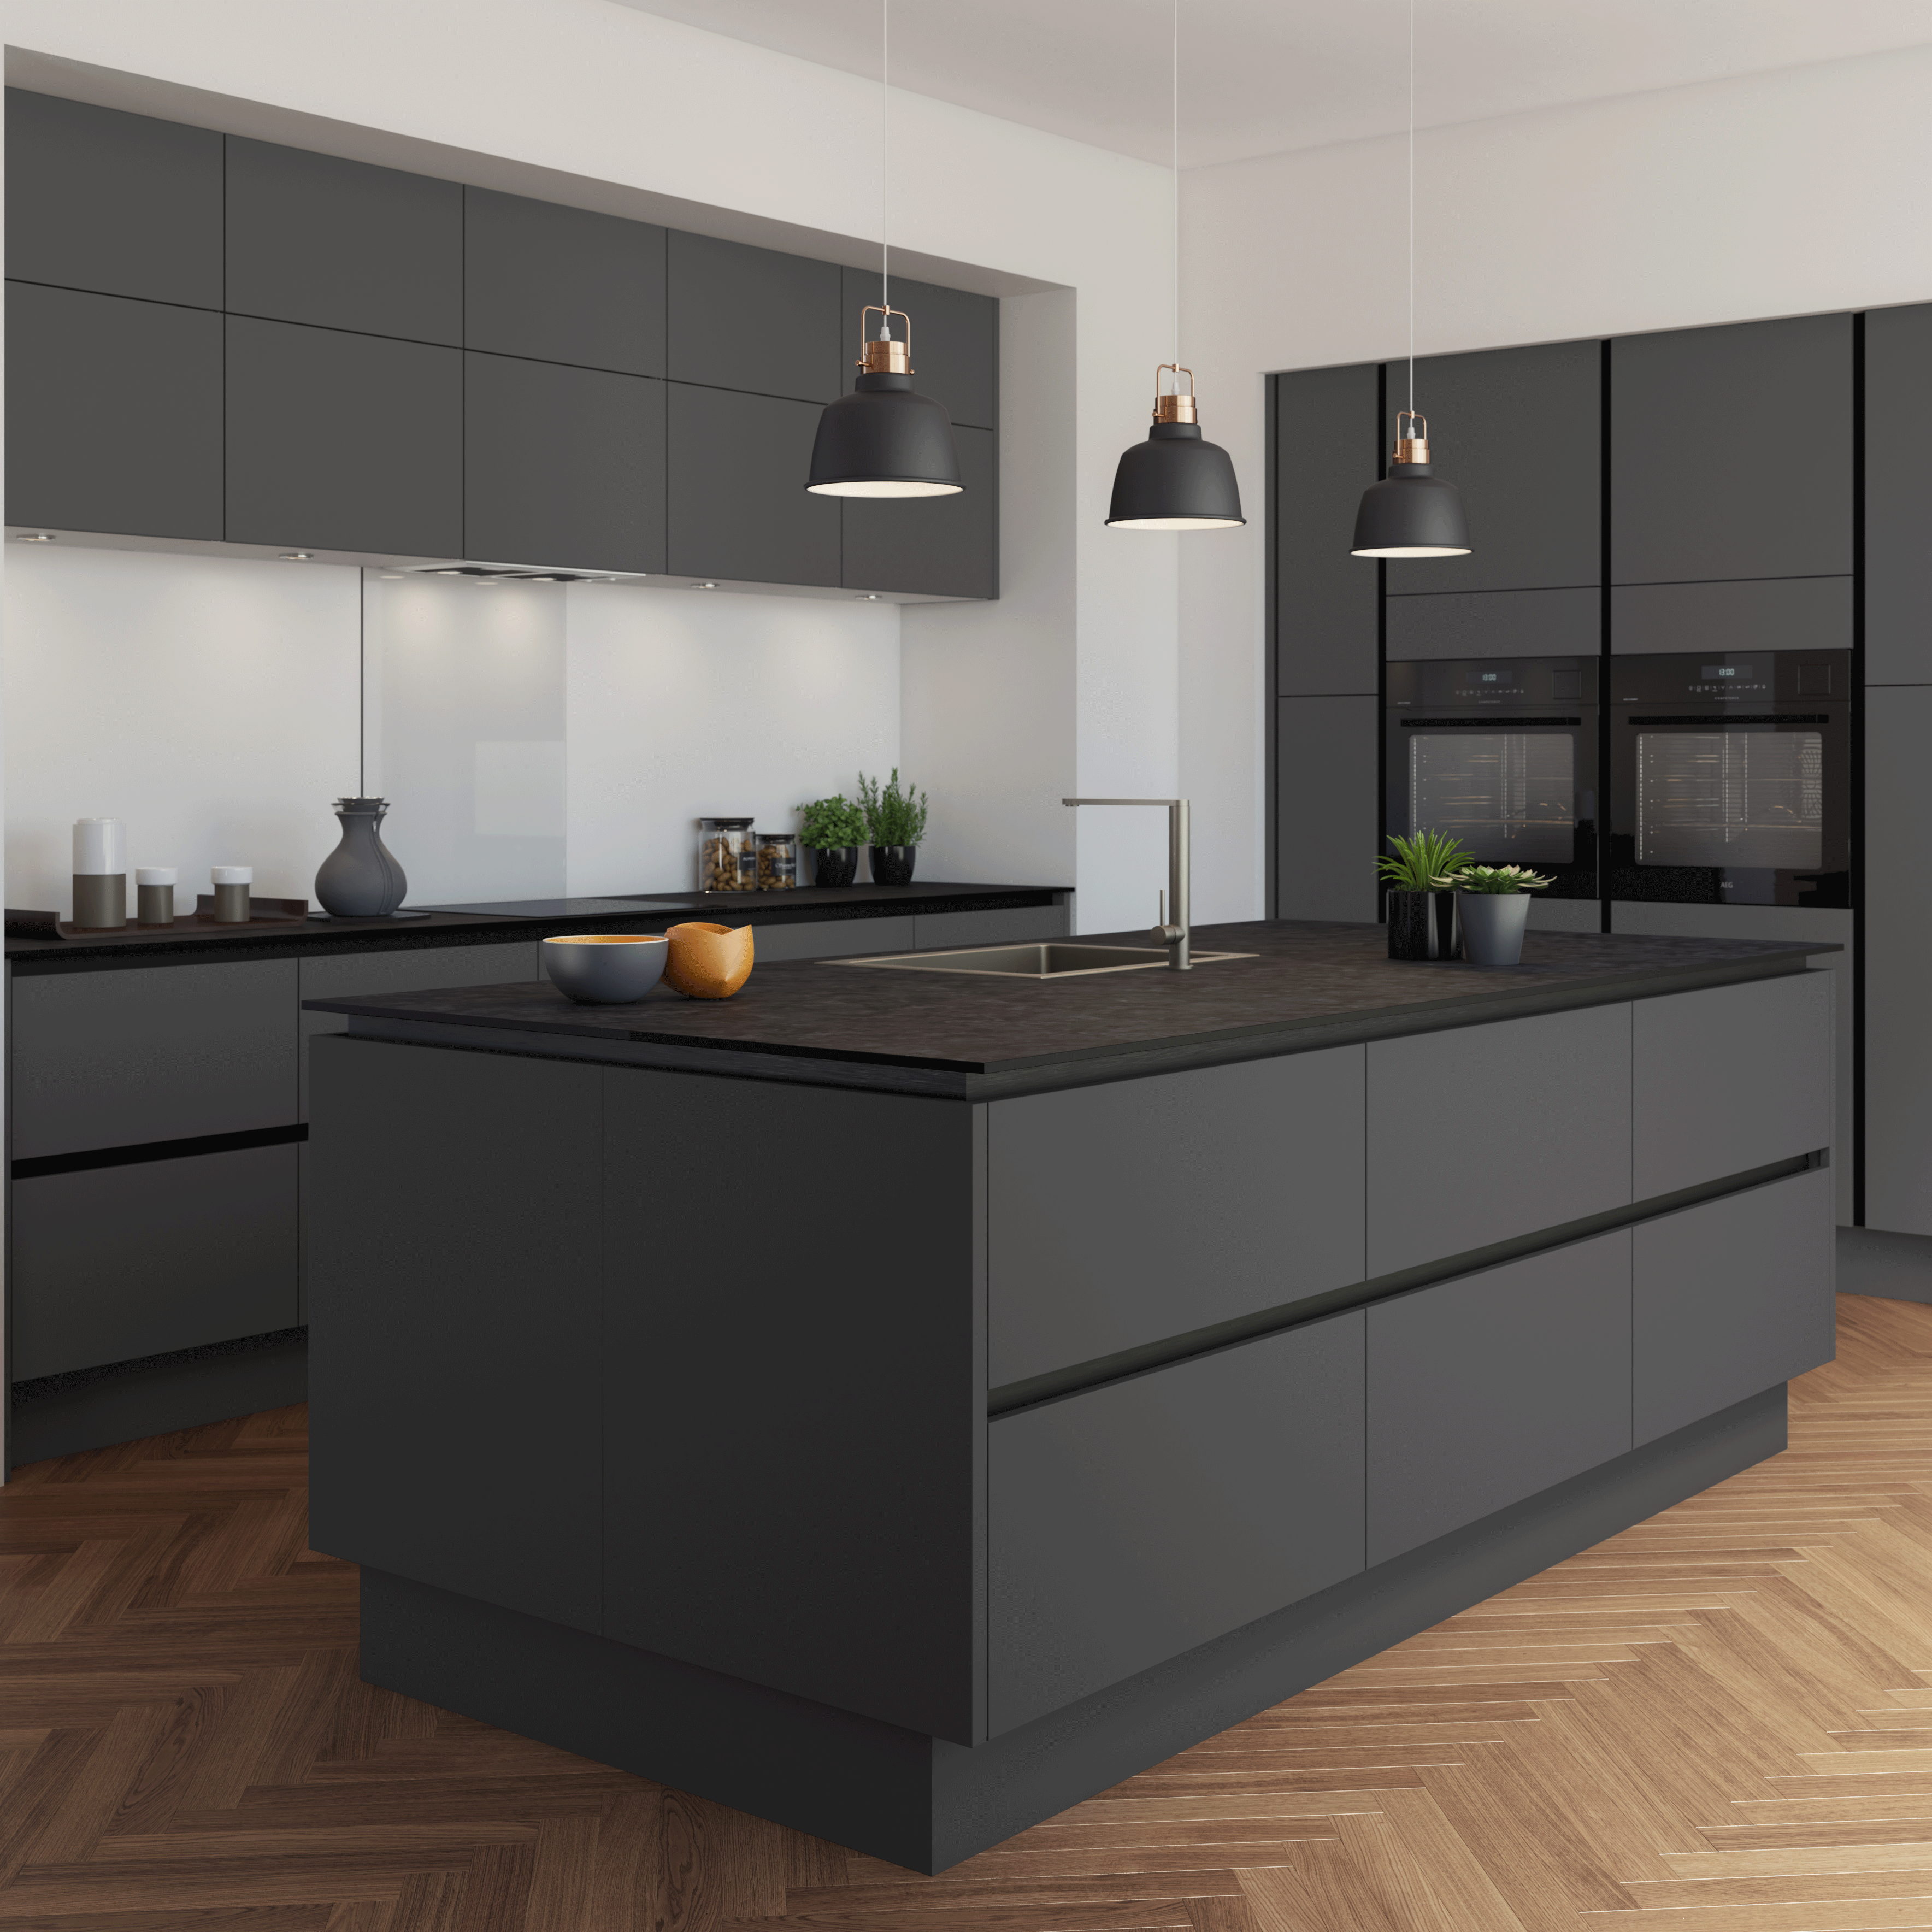 kitchen with black furniture and wood flooring